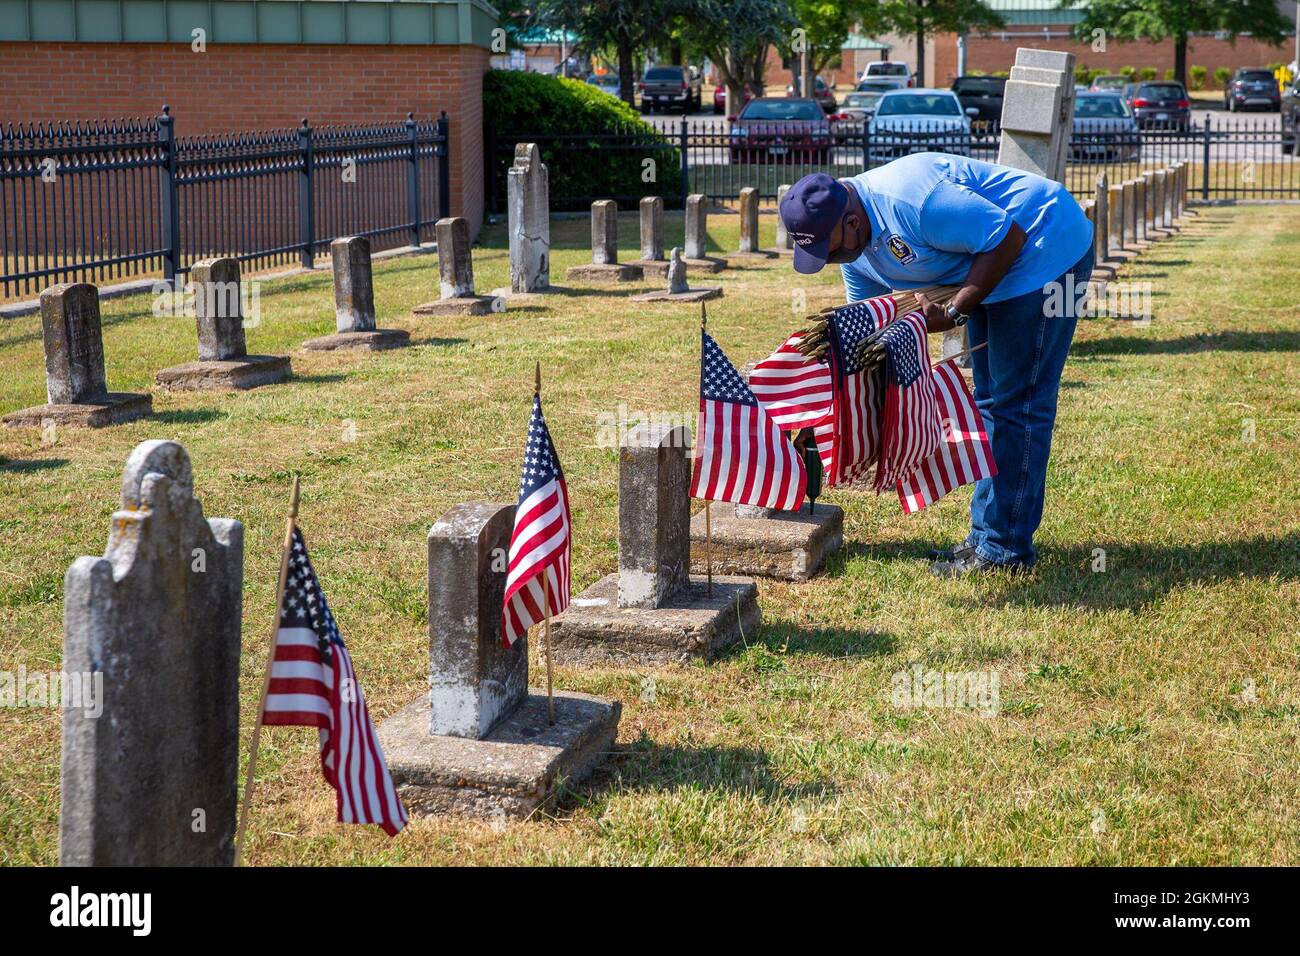 Ricky Burroughs, a member of the Norfolk Naval Shipyard Veteran Employee Readiness Group, places flags on the graves of fallen service members during the annual flag placement ceremony at the Captain Ted Conaway Memorial Naval Cemetery in Naval Medical Center Portsmouth (NMCP) May 27. Stock Photo